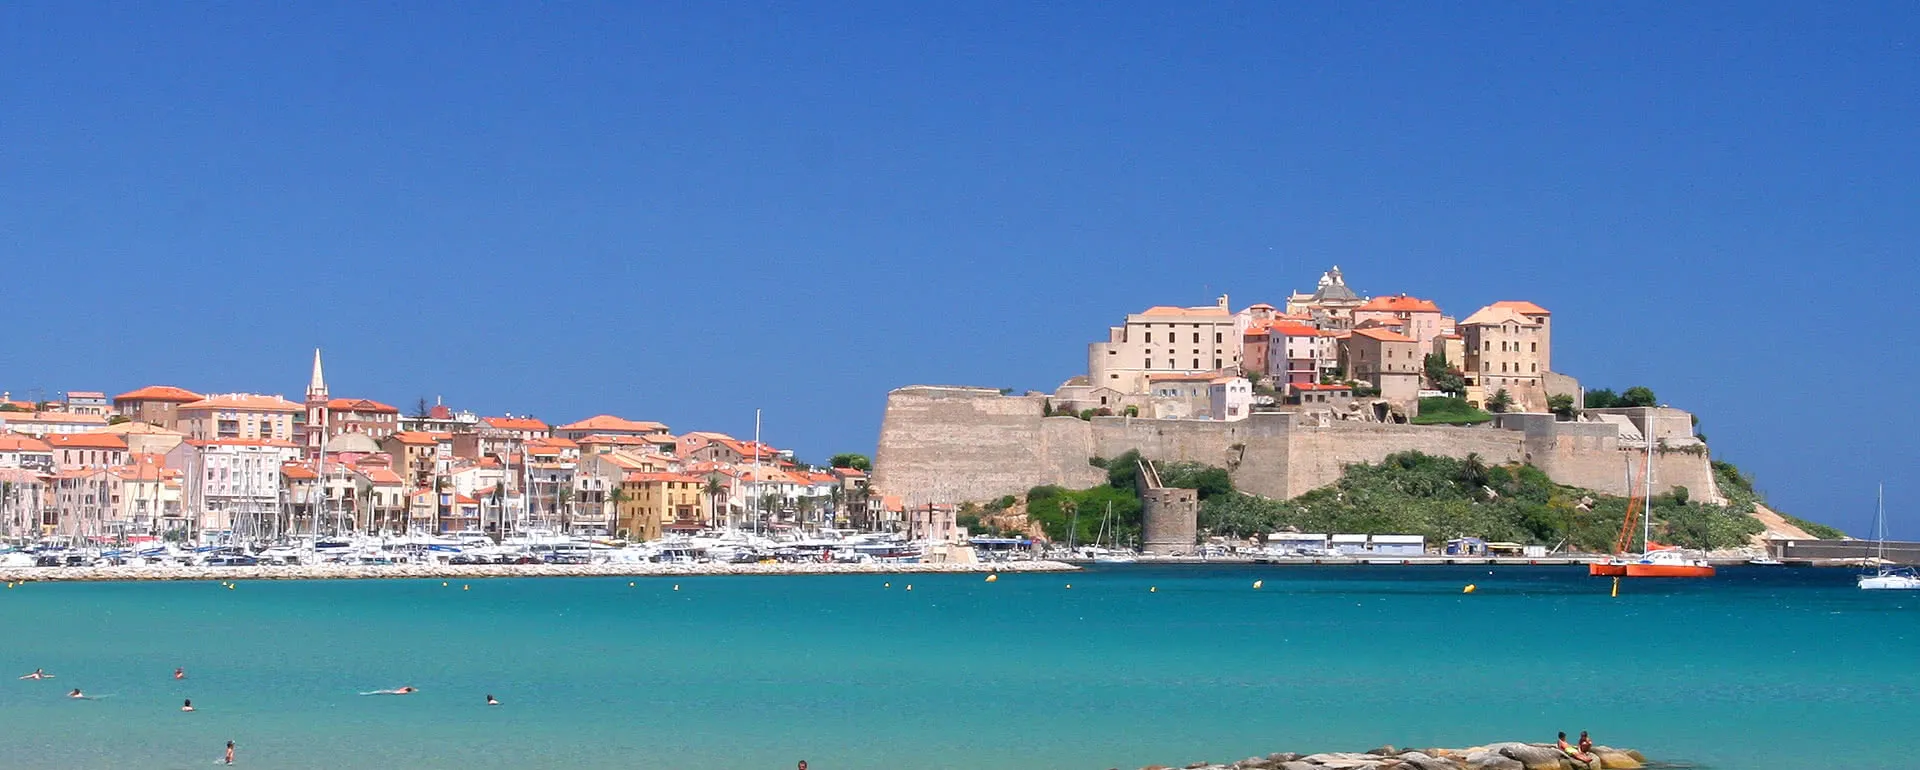 Calvi - the destination with youth hostels